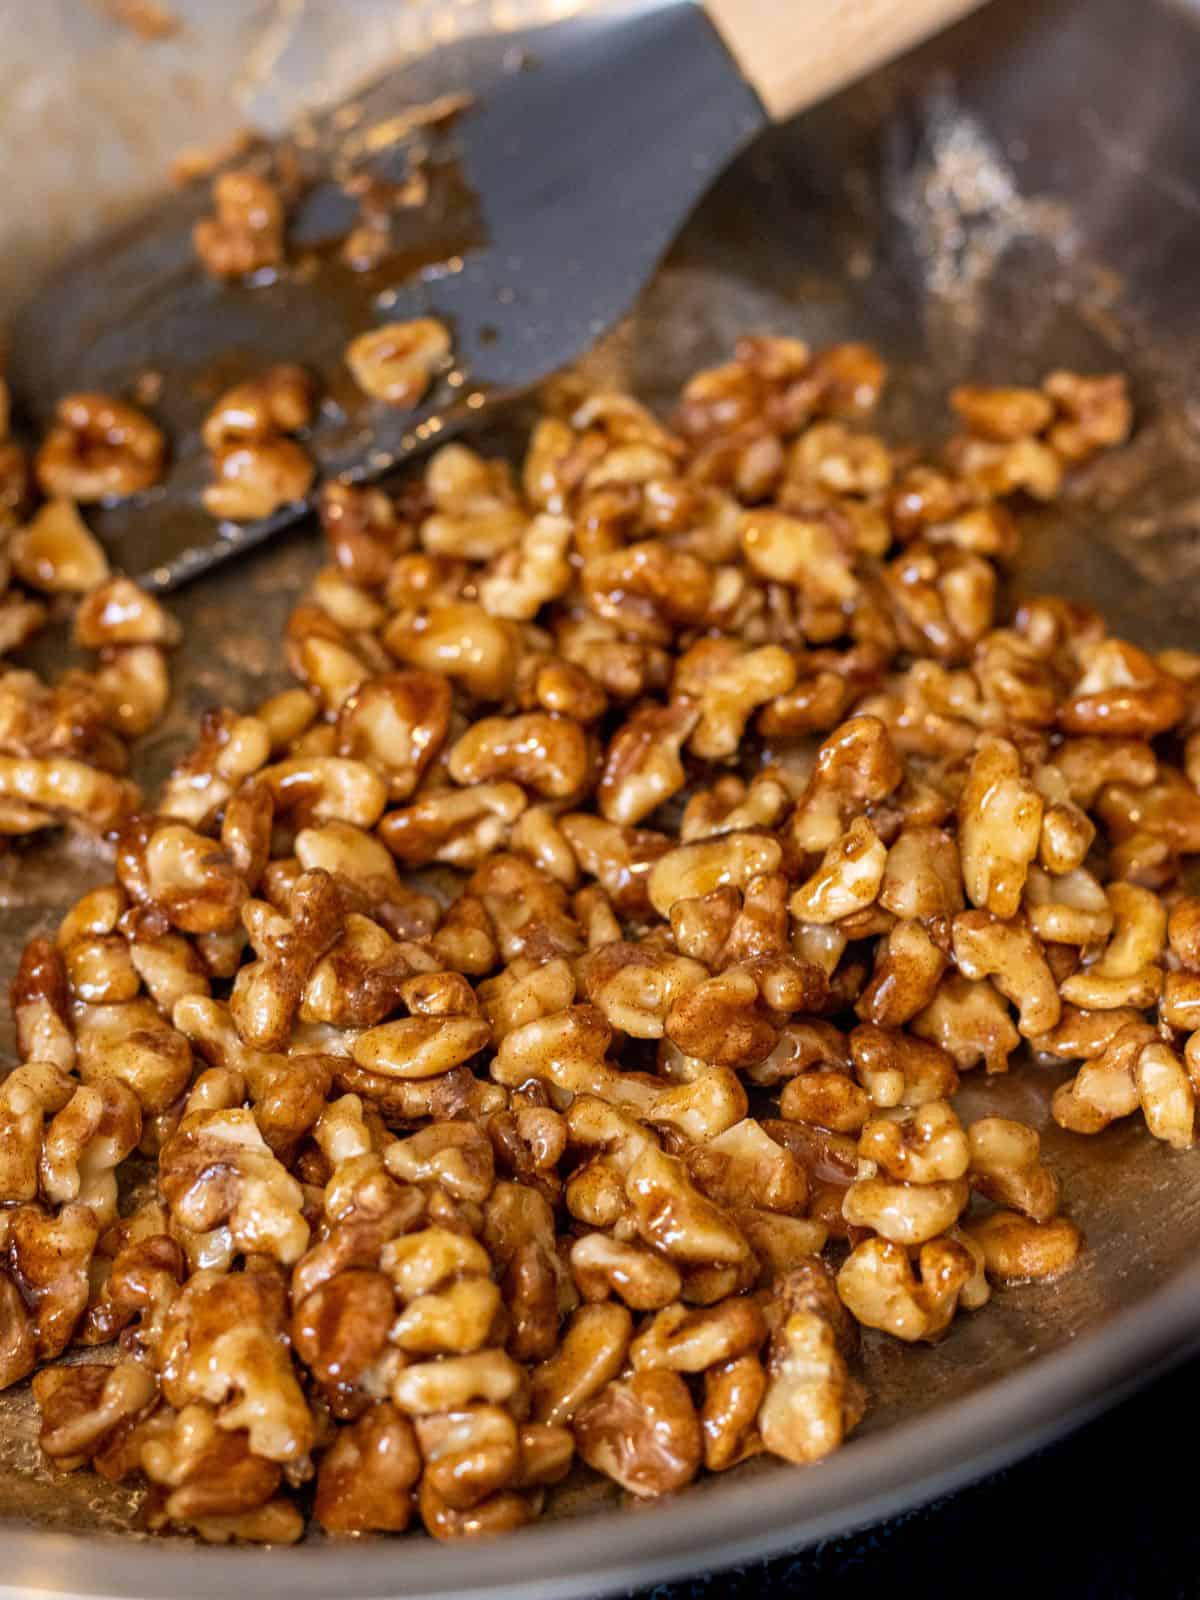 Walnuts tossed in brown sugar sauce in a skillet with a spatula.